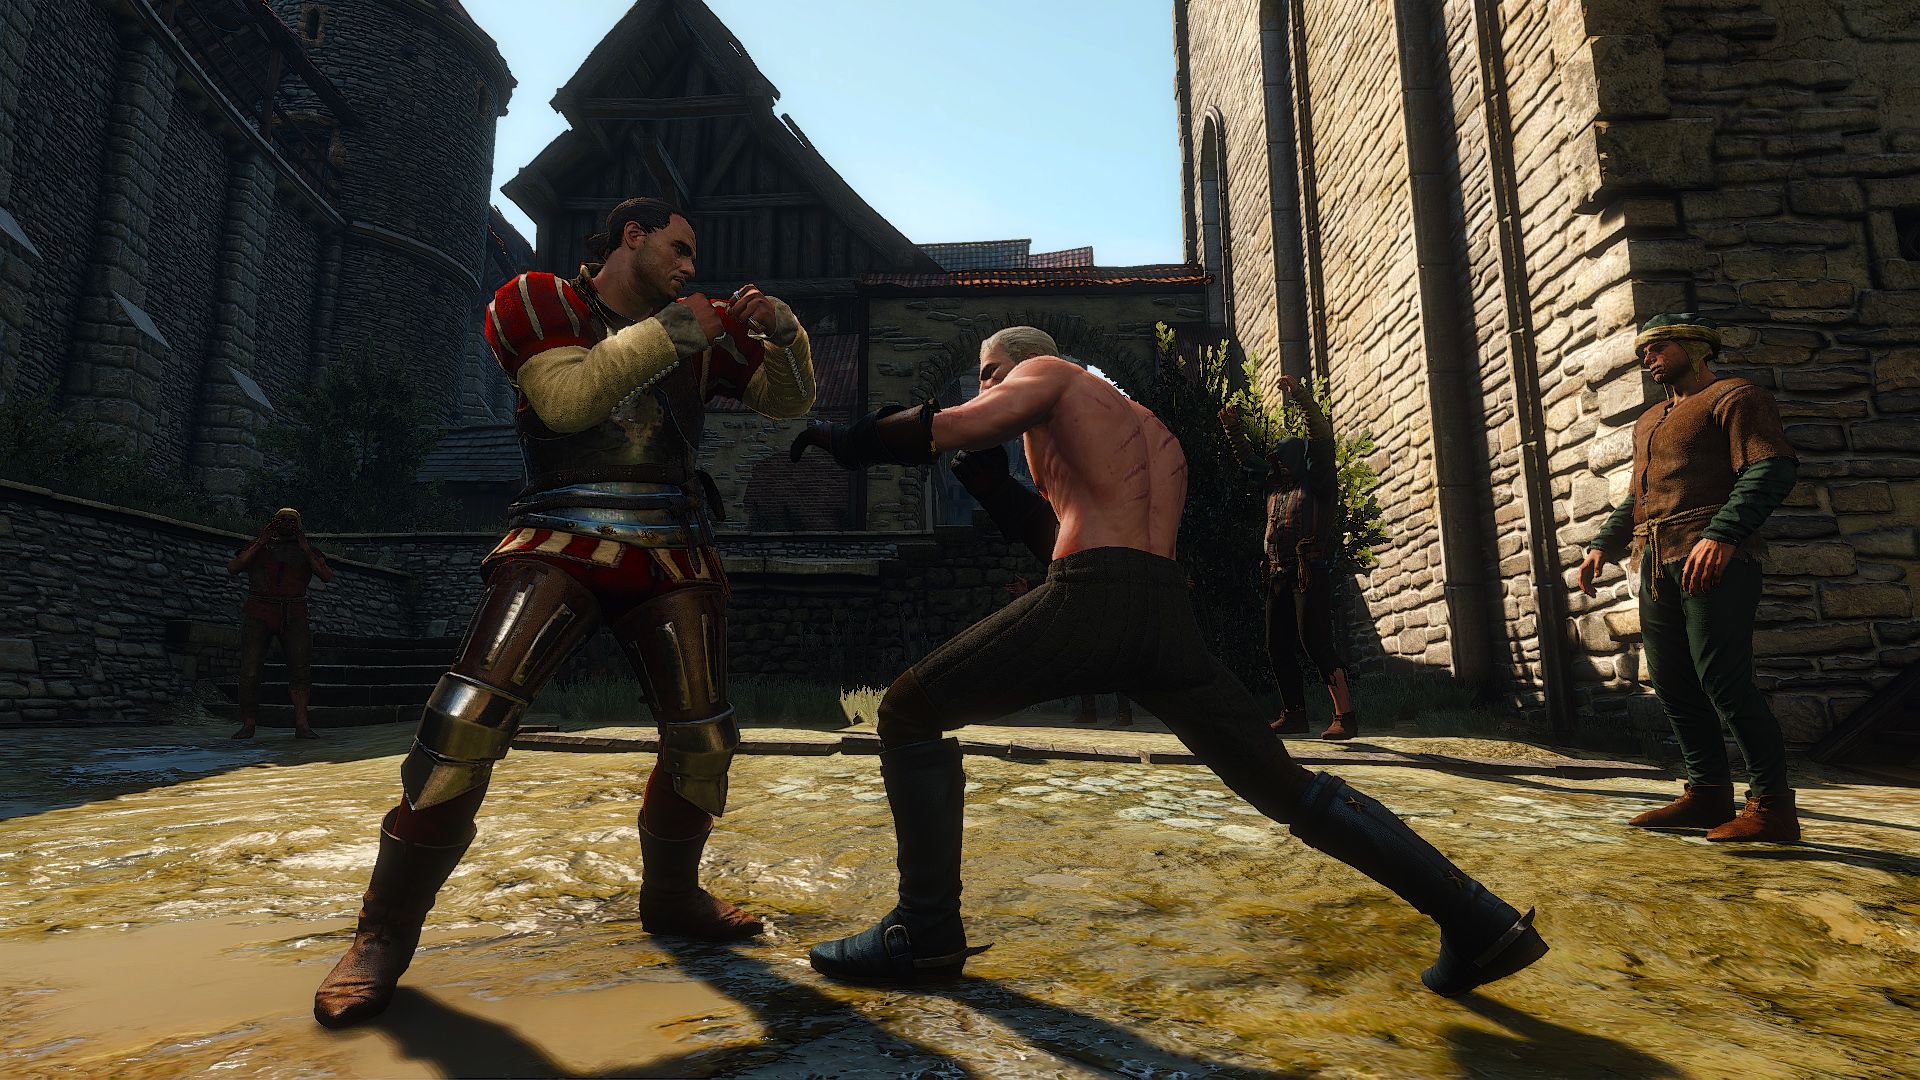 Fists of Fury championship fistfight Novigrad Geralt versus Captain Mortimer Ferreo The Witcher 3